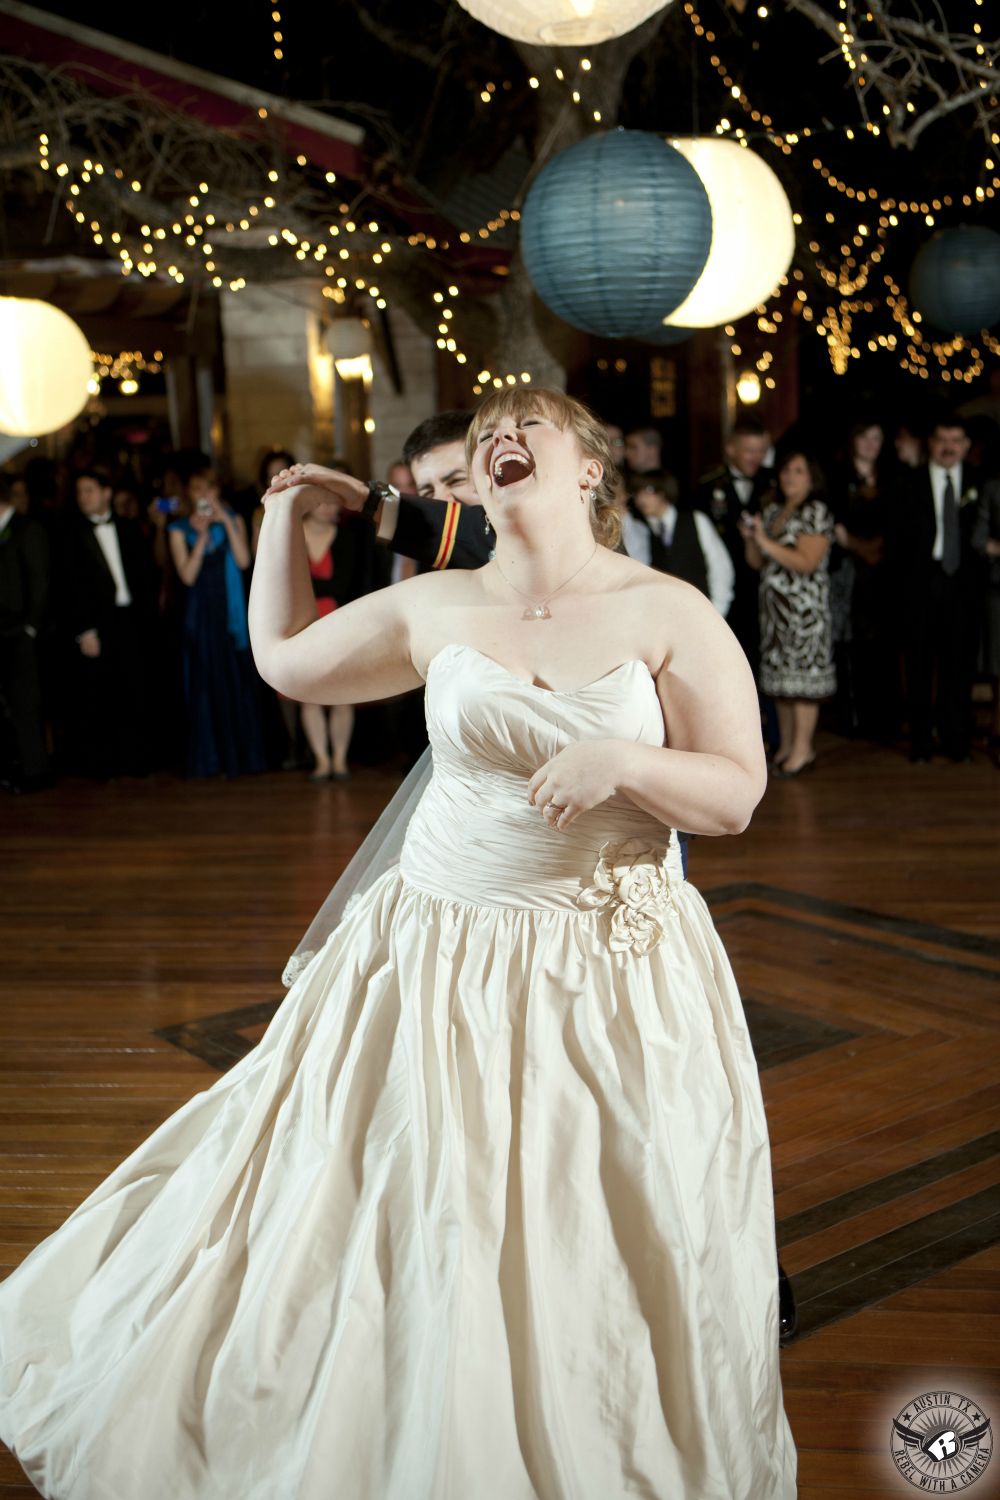 Super happy bride in gorgous strapless ballgown wedding dress is laughing joyously as groom in military dress blues uniform twirls her on the dance floor under paper lanterns hanging from the trees with twinkly lights at Kindred Oaks the Austin wedding venue while Dexter Kyner DJ for Hire spins some tunes.